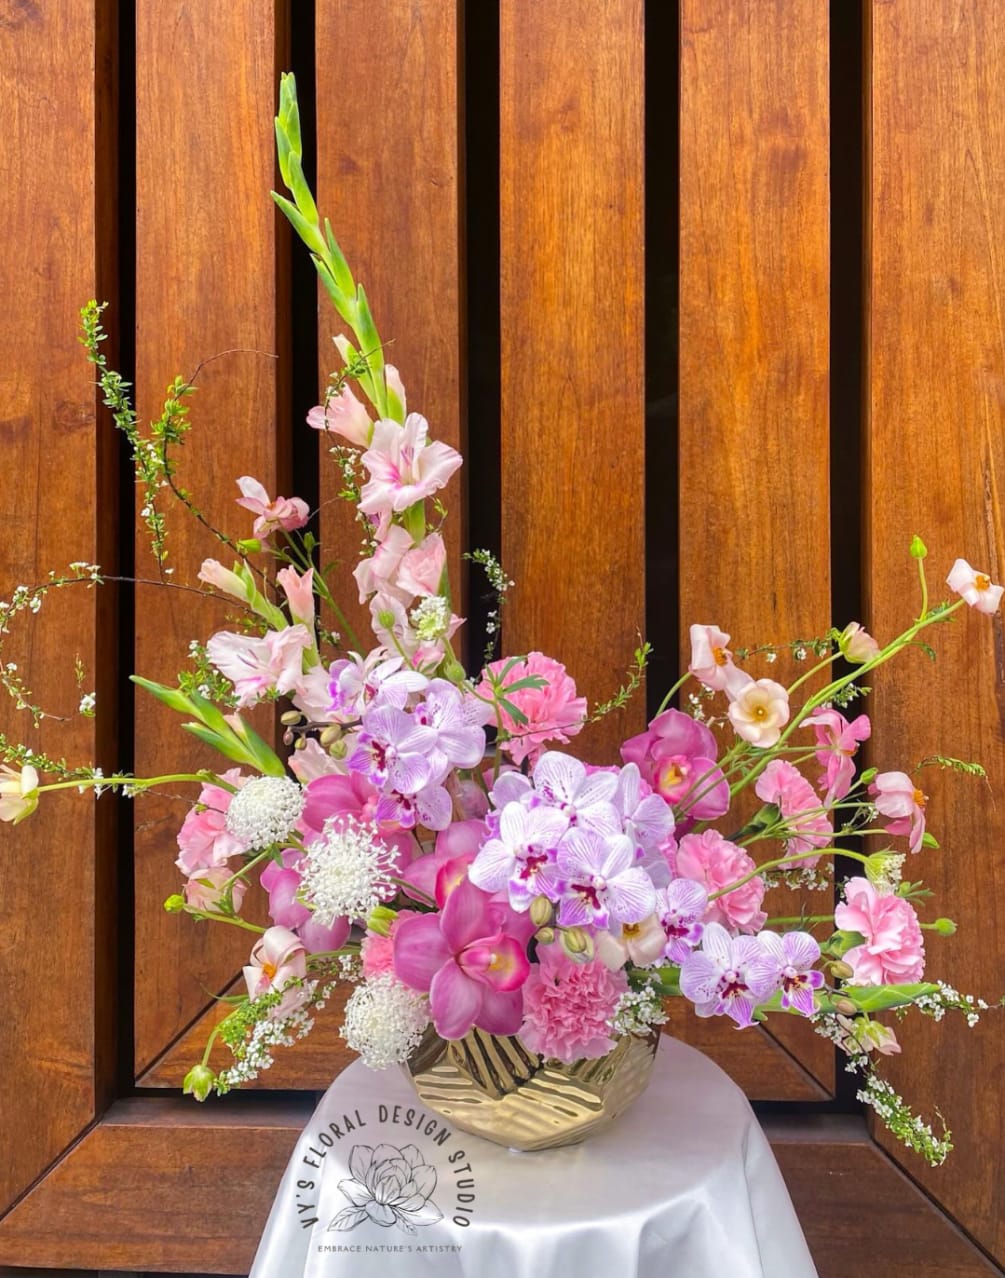 Blooming Extravagance&quot; - a breathtaking floral arrangement that exudes opulence and elegance.